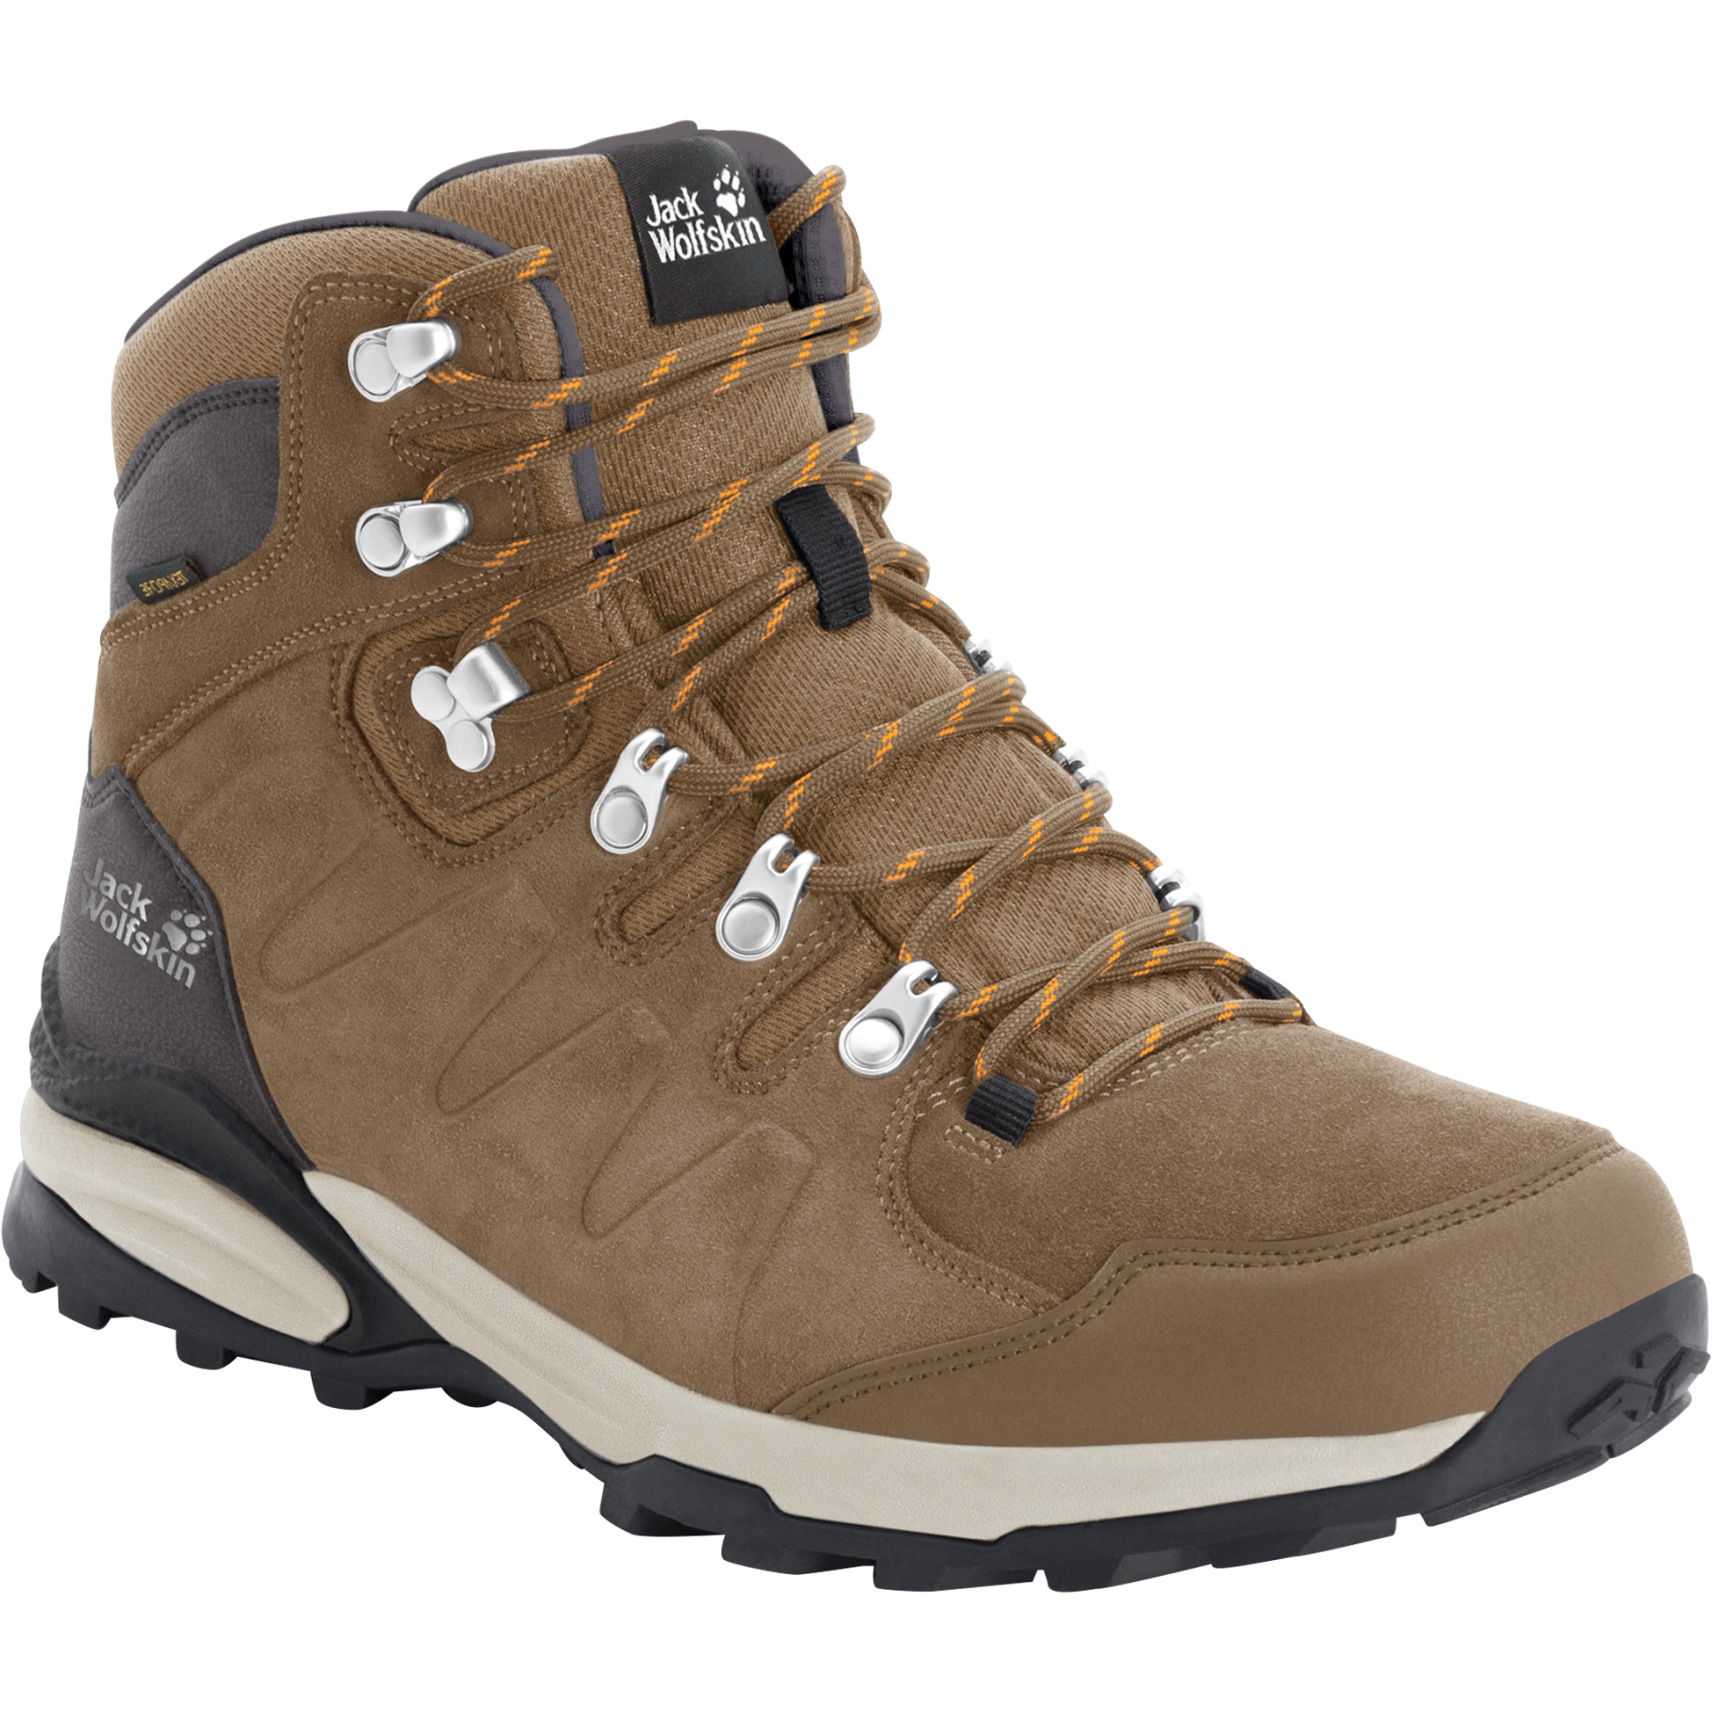 Image of Jack Wolfskin Refugio Texapore Mid Hiking Boots Women - brown / apricot